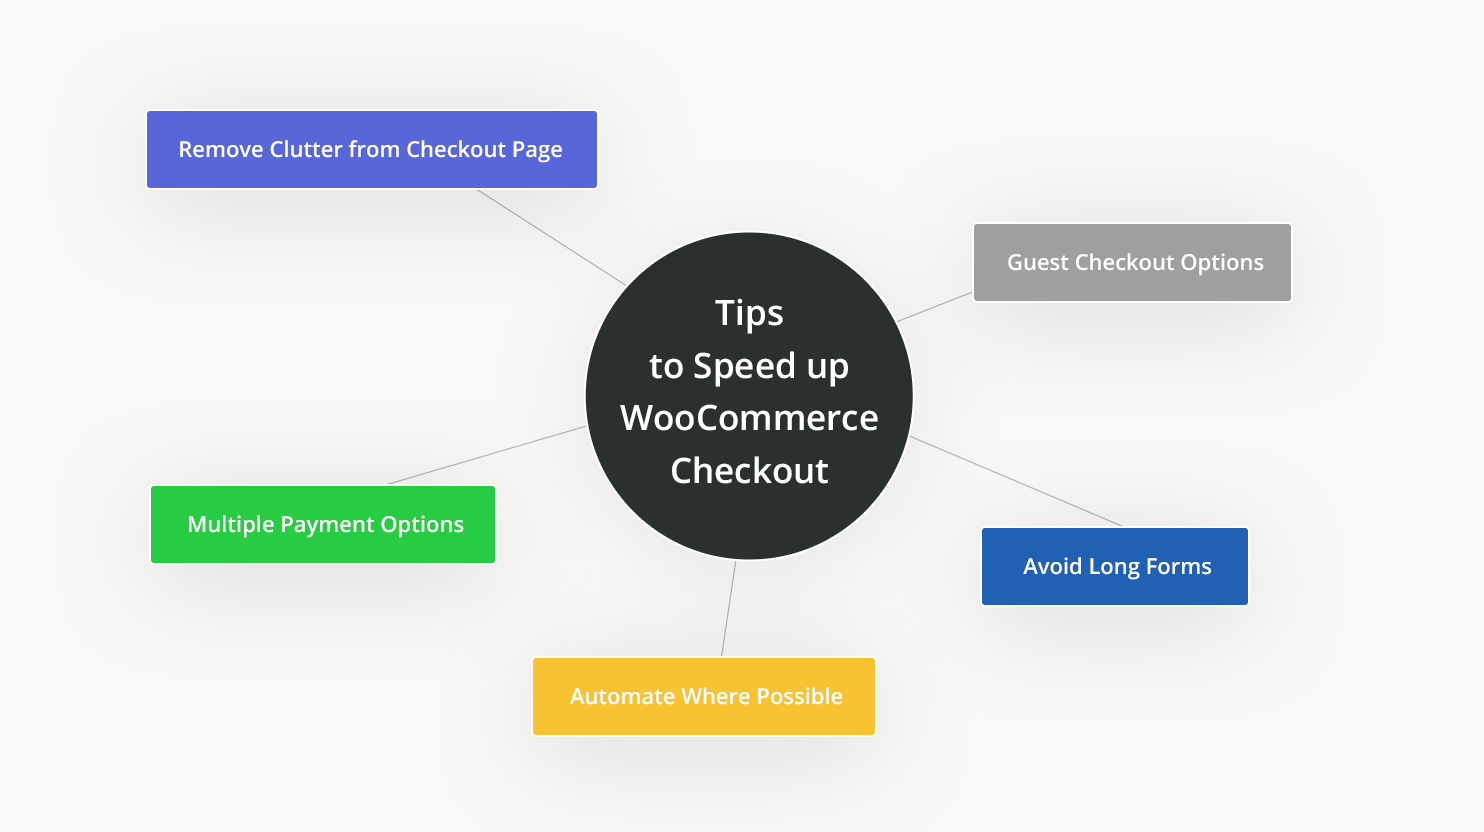 Tips to speed up WooCommerce checkout